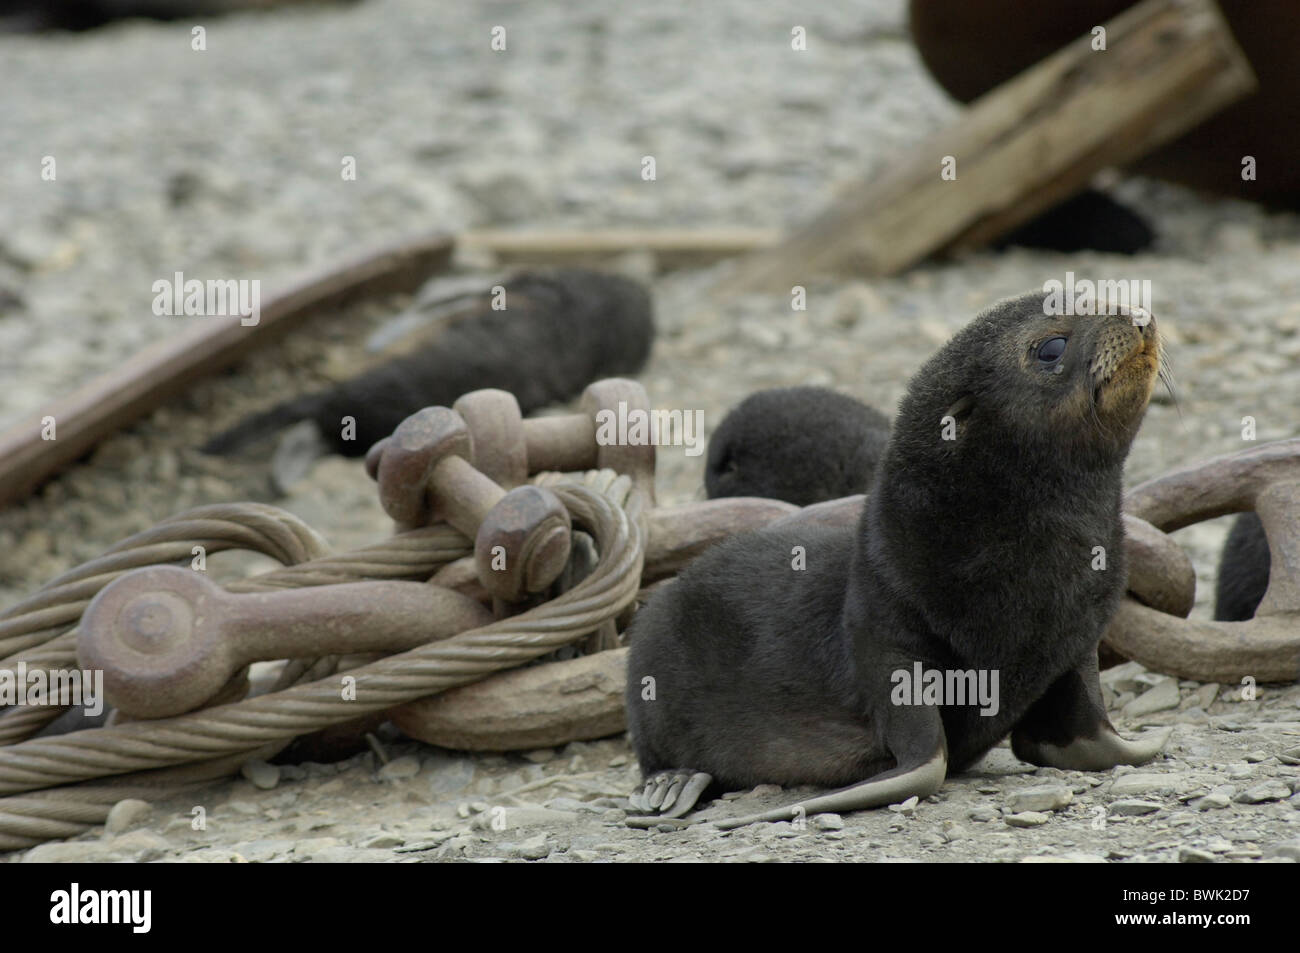 South Georgia Island group south Atlantic Stromness sea lion baby young young animal seal scrap metal rubbis Stock Photo